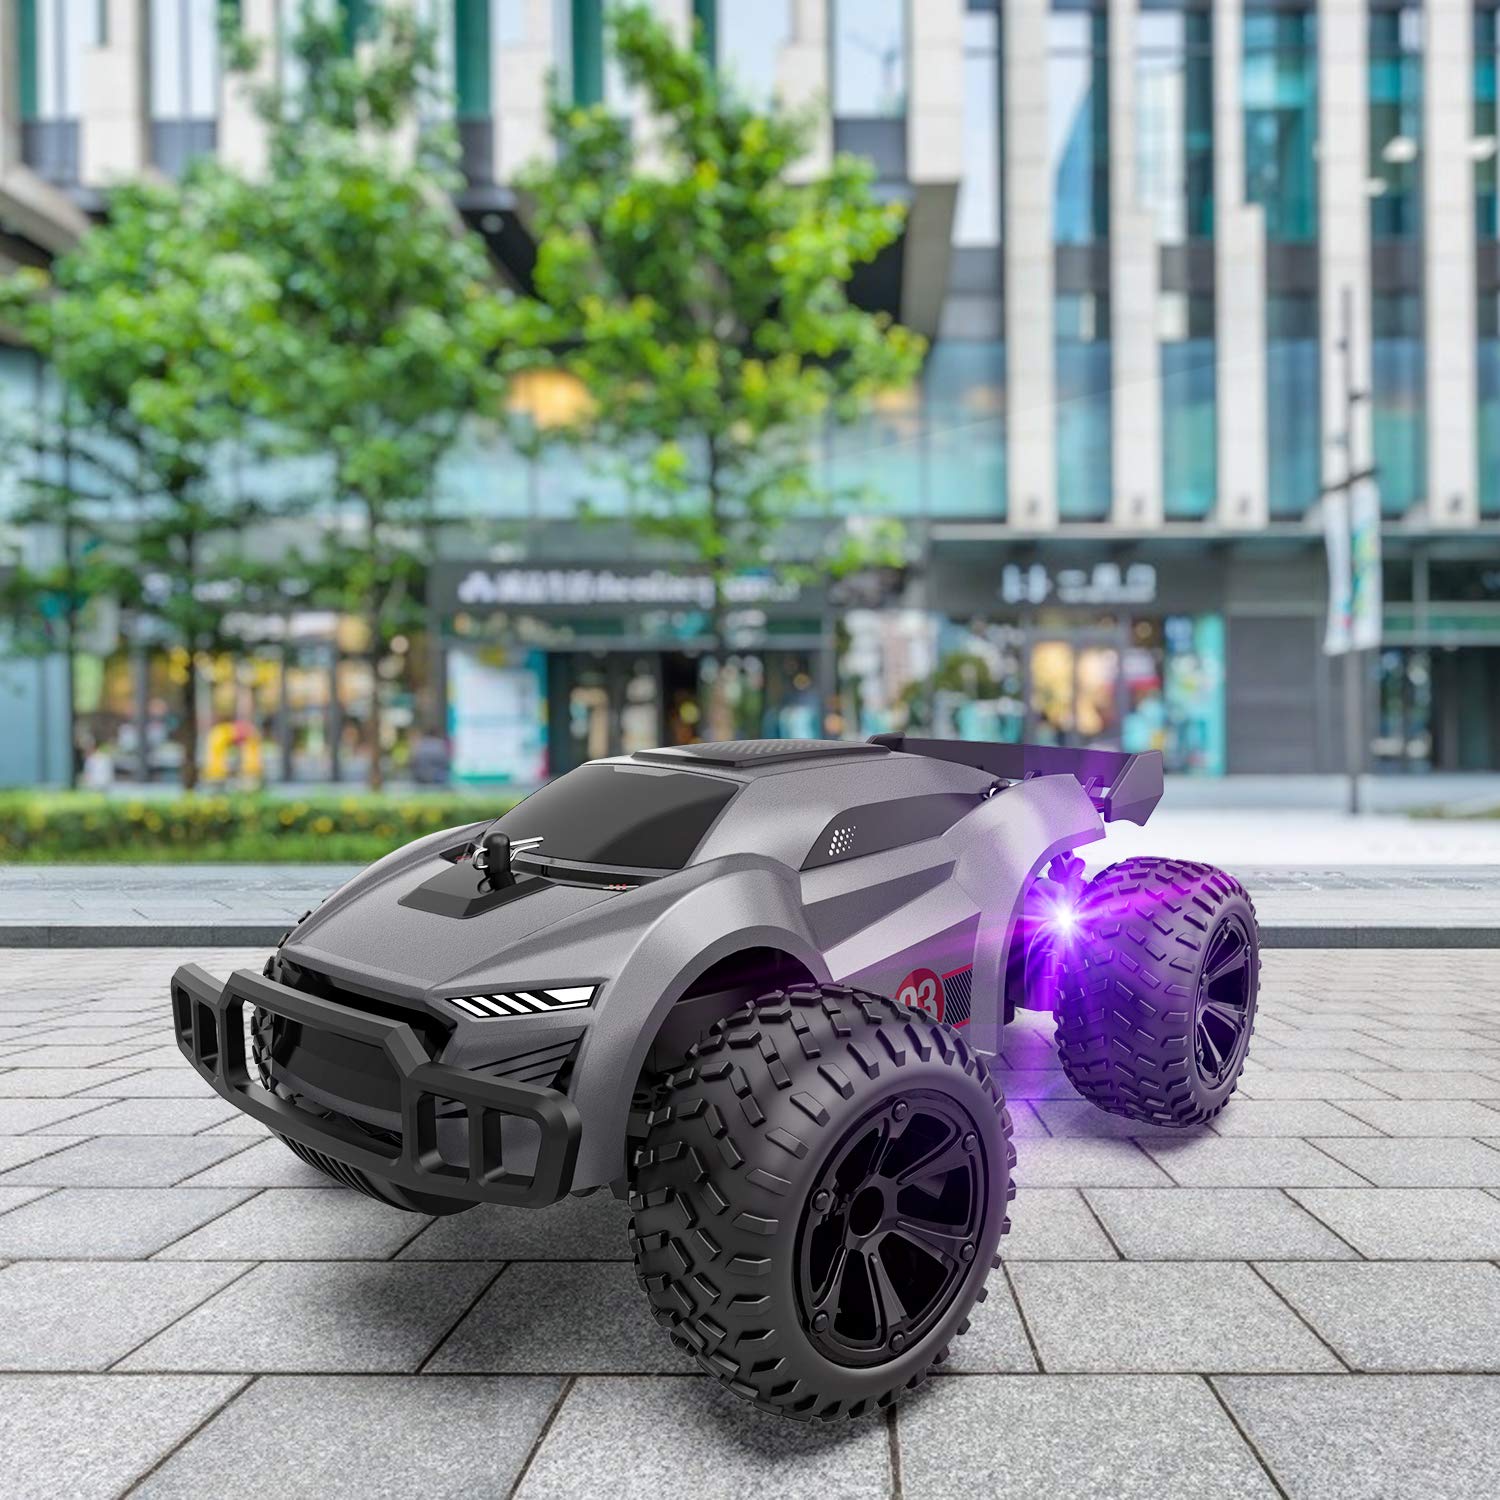 EpochAir Remote Control Car - 2.4GHz High Speed Rc Cars, Offroad Hobby Rc Racing Car with Colorful Led Lights and Rechargeable Battery,Electric Toy Car Gift for 3 4 5 6 7 8 Year Old Boys Girls Kids